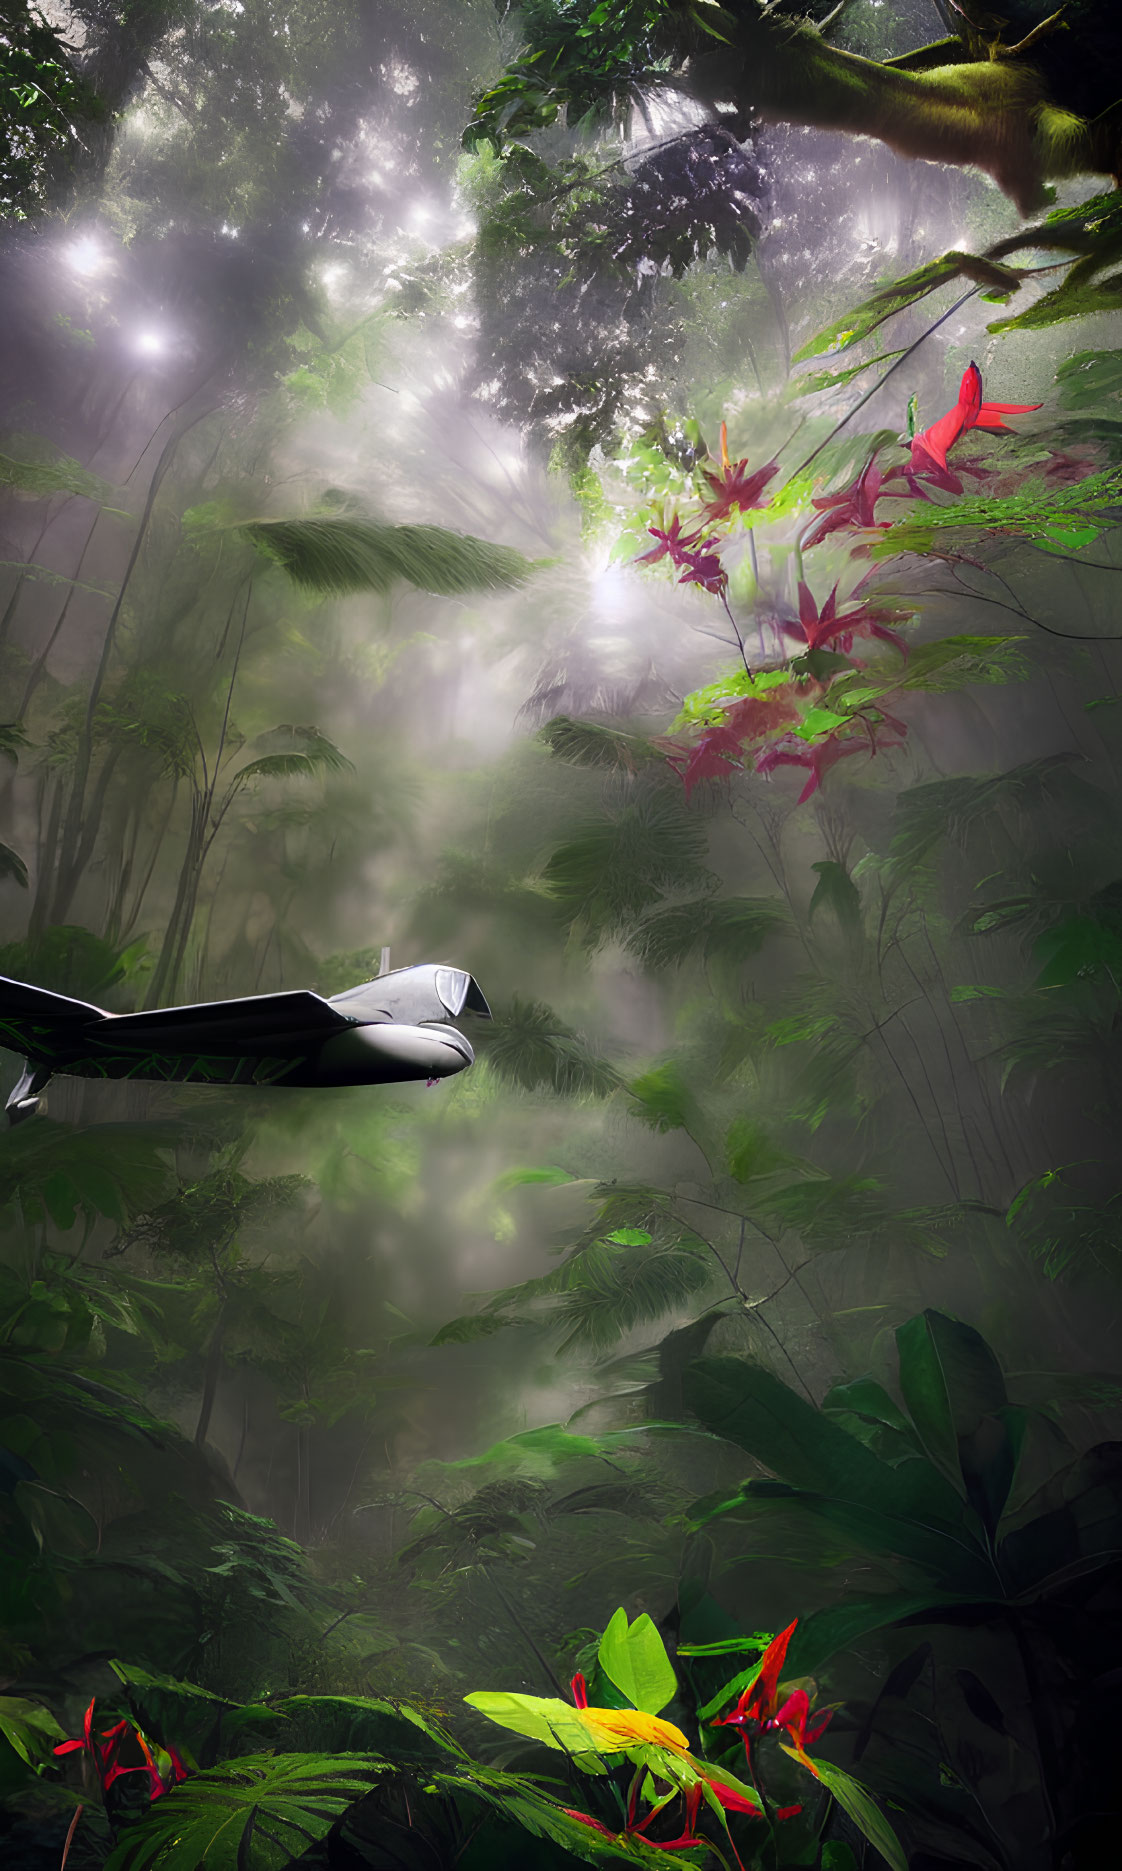 Futuristic hovering vehicle in lush jungle with red plants and sunlight.